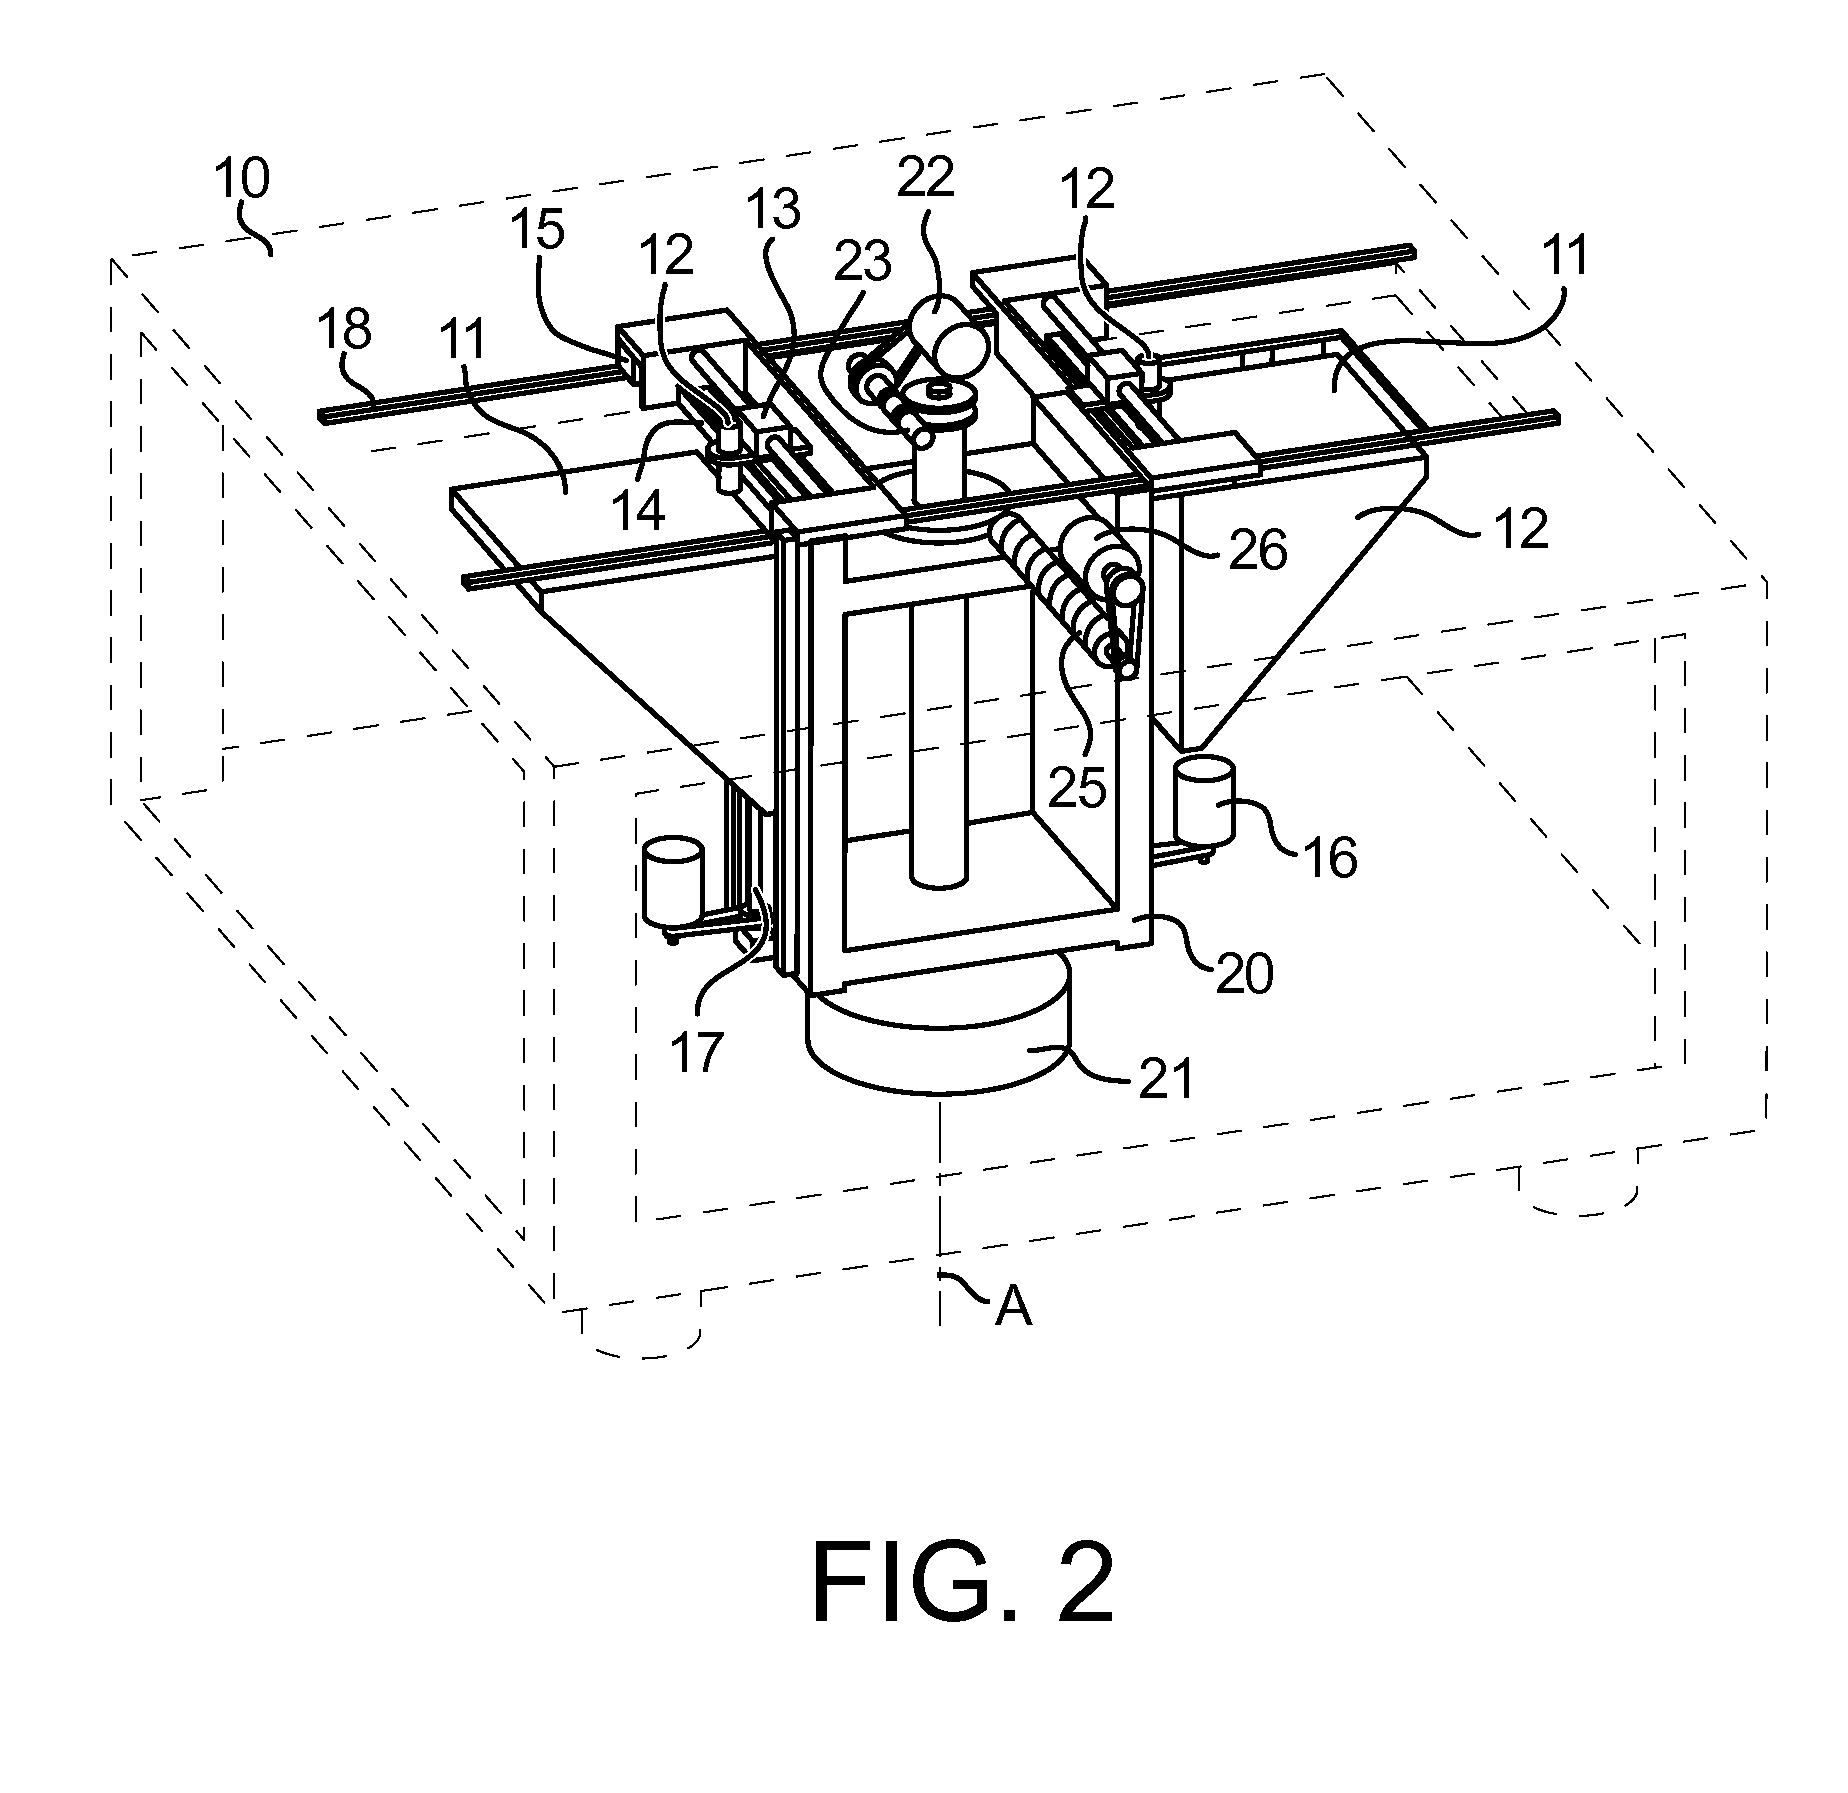 Method and machine for producing three-dimensional objects by means of successive layer deposition